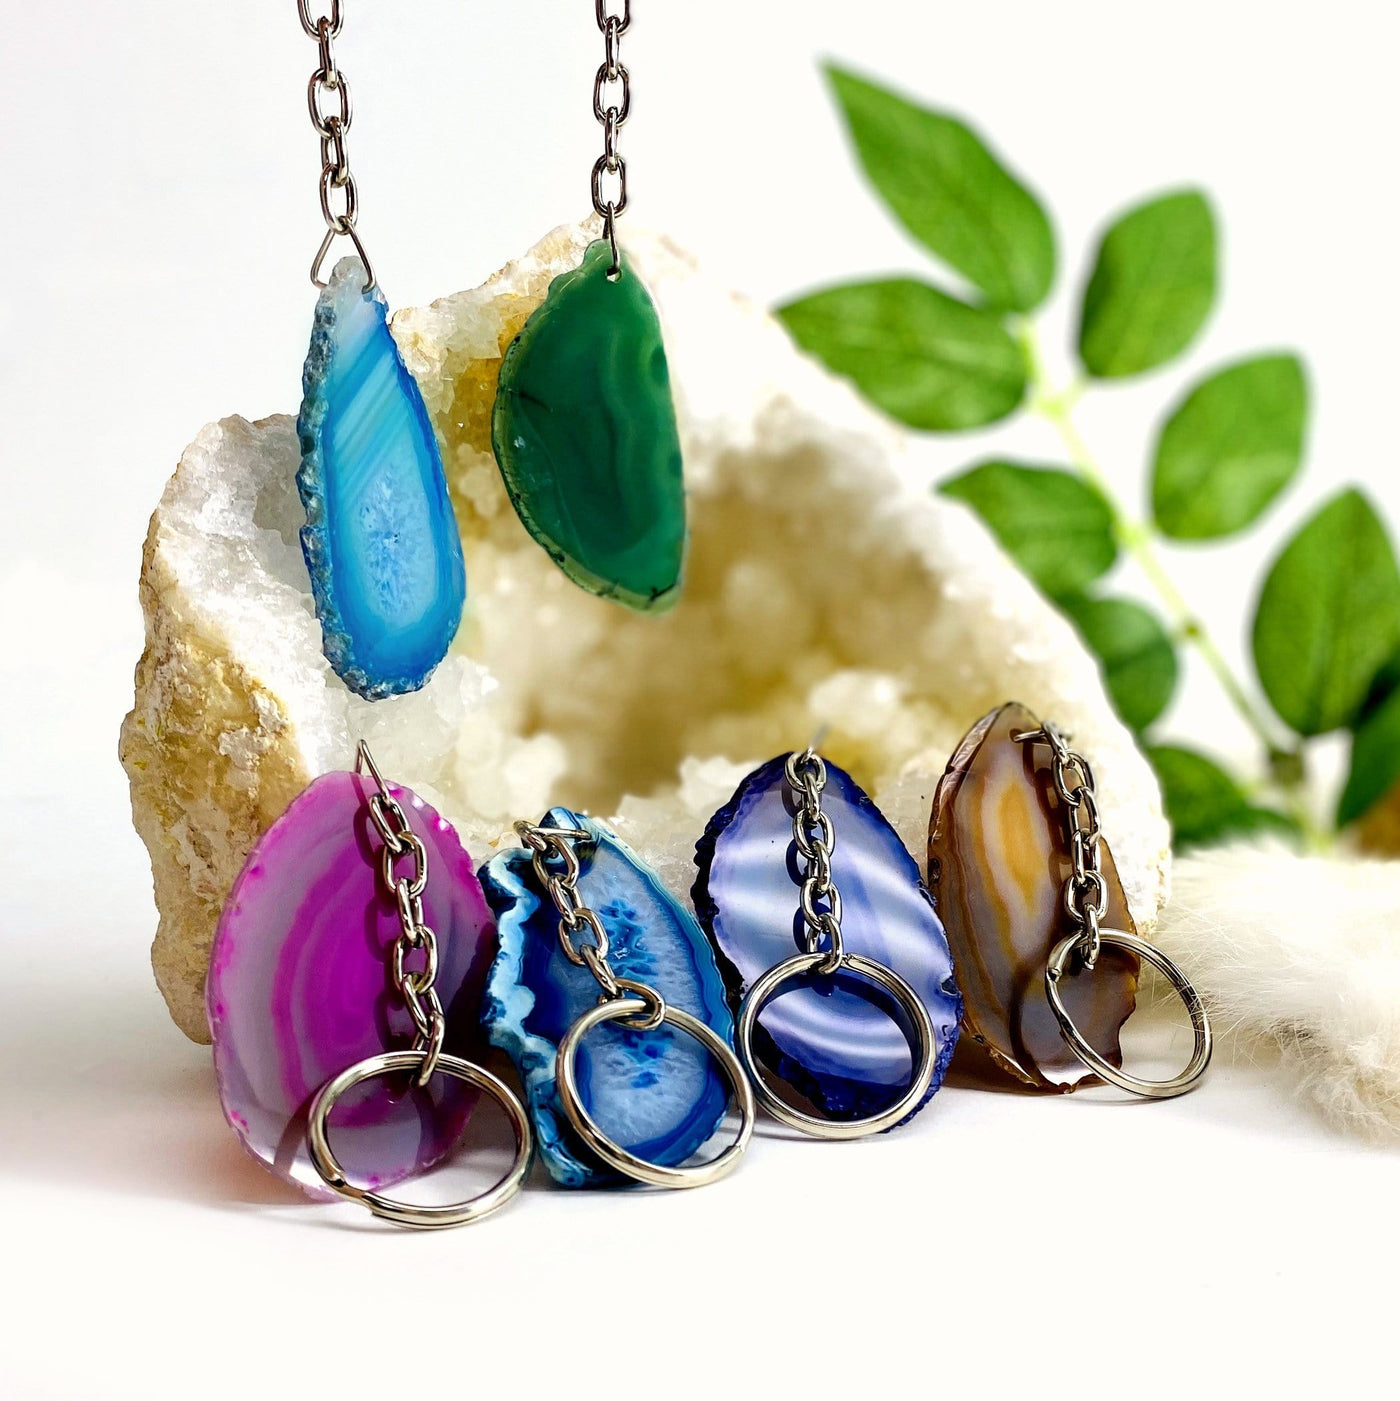 Close up of agate keychains next to a geode with plants in the background.